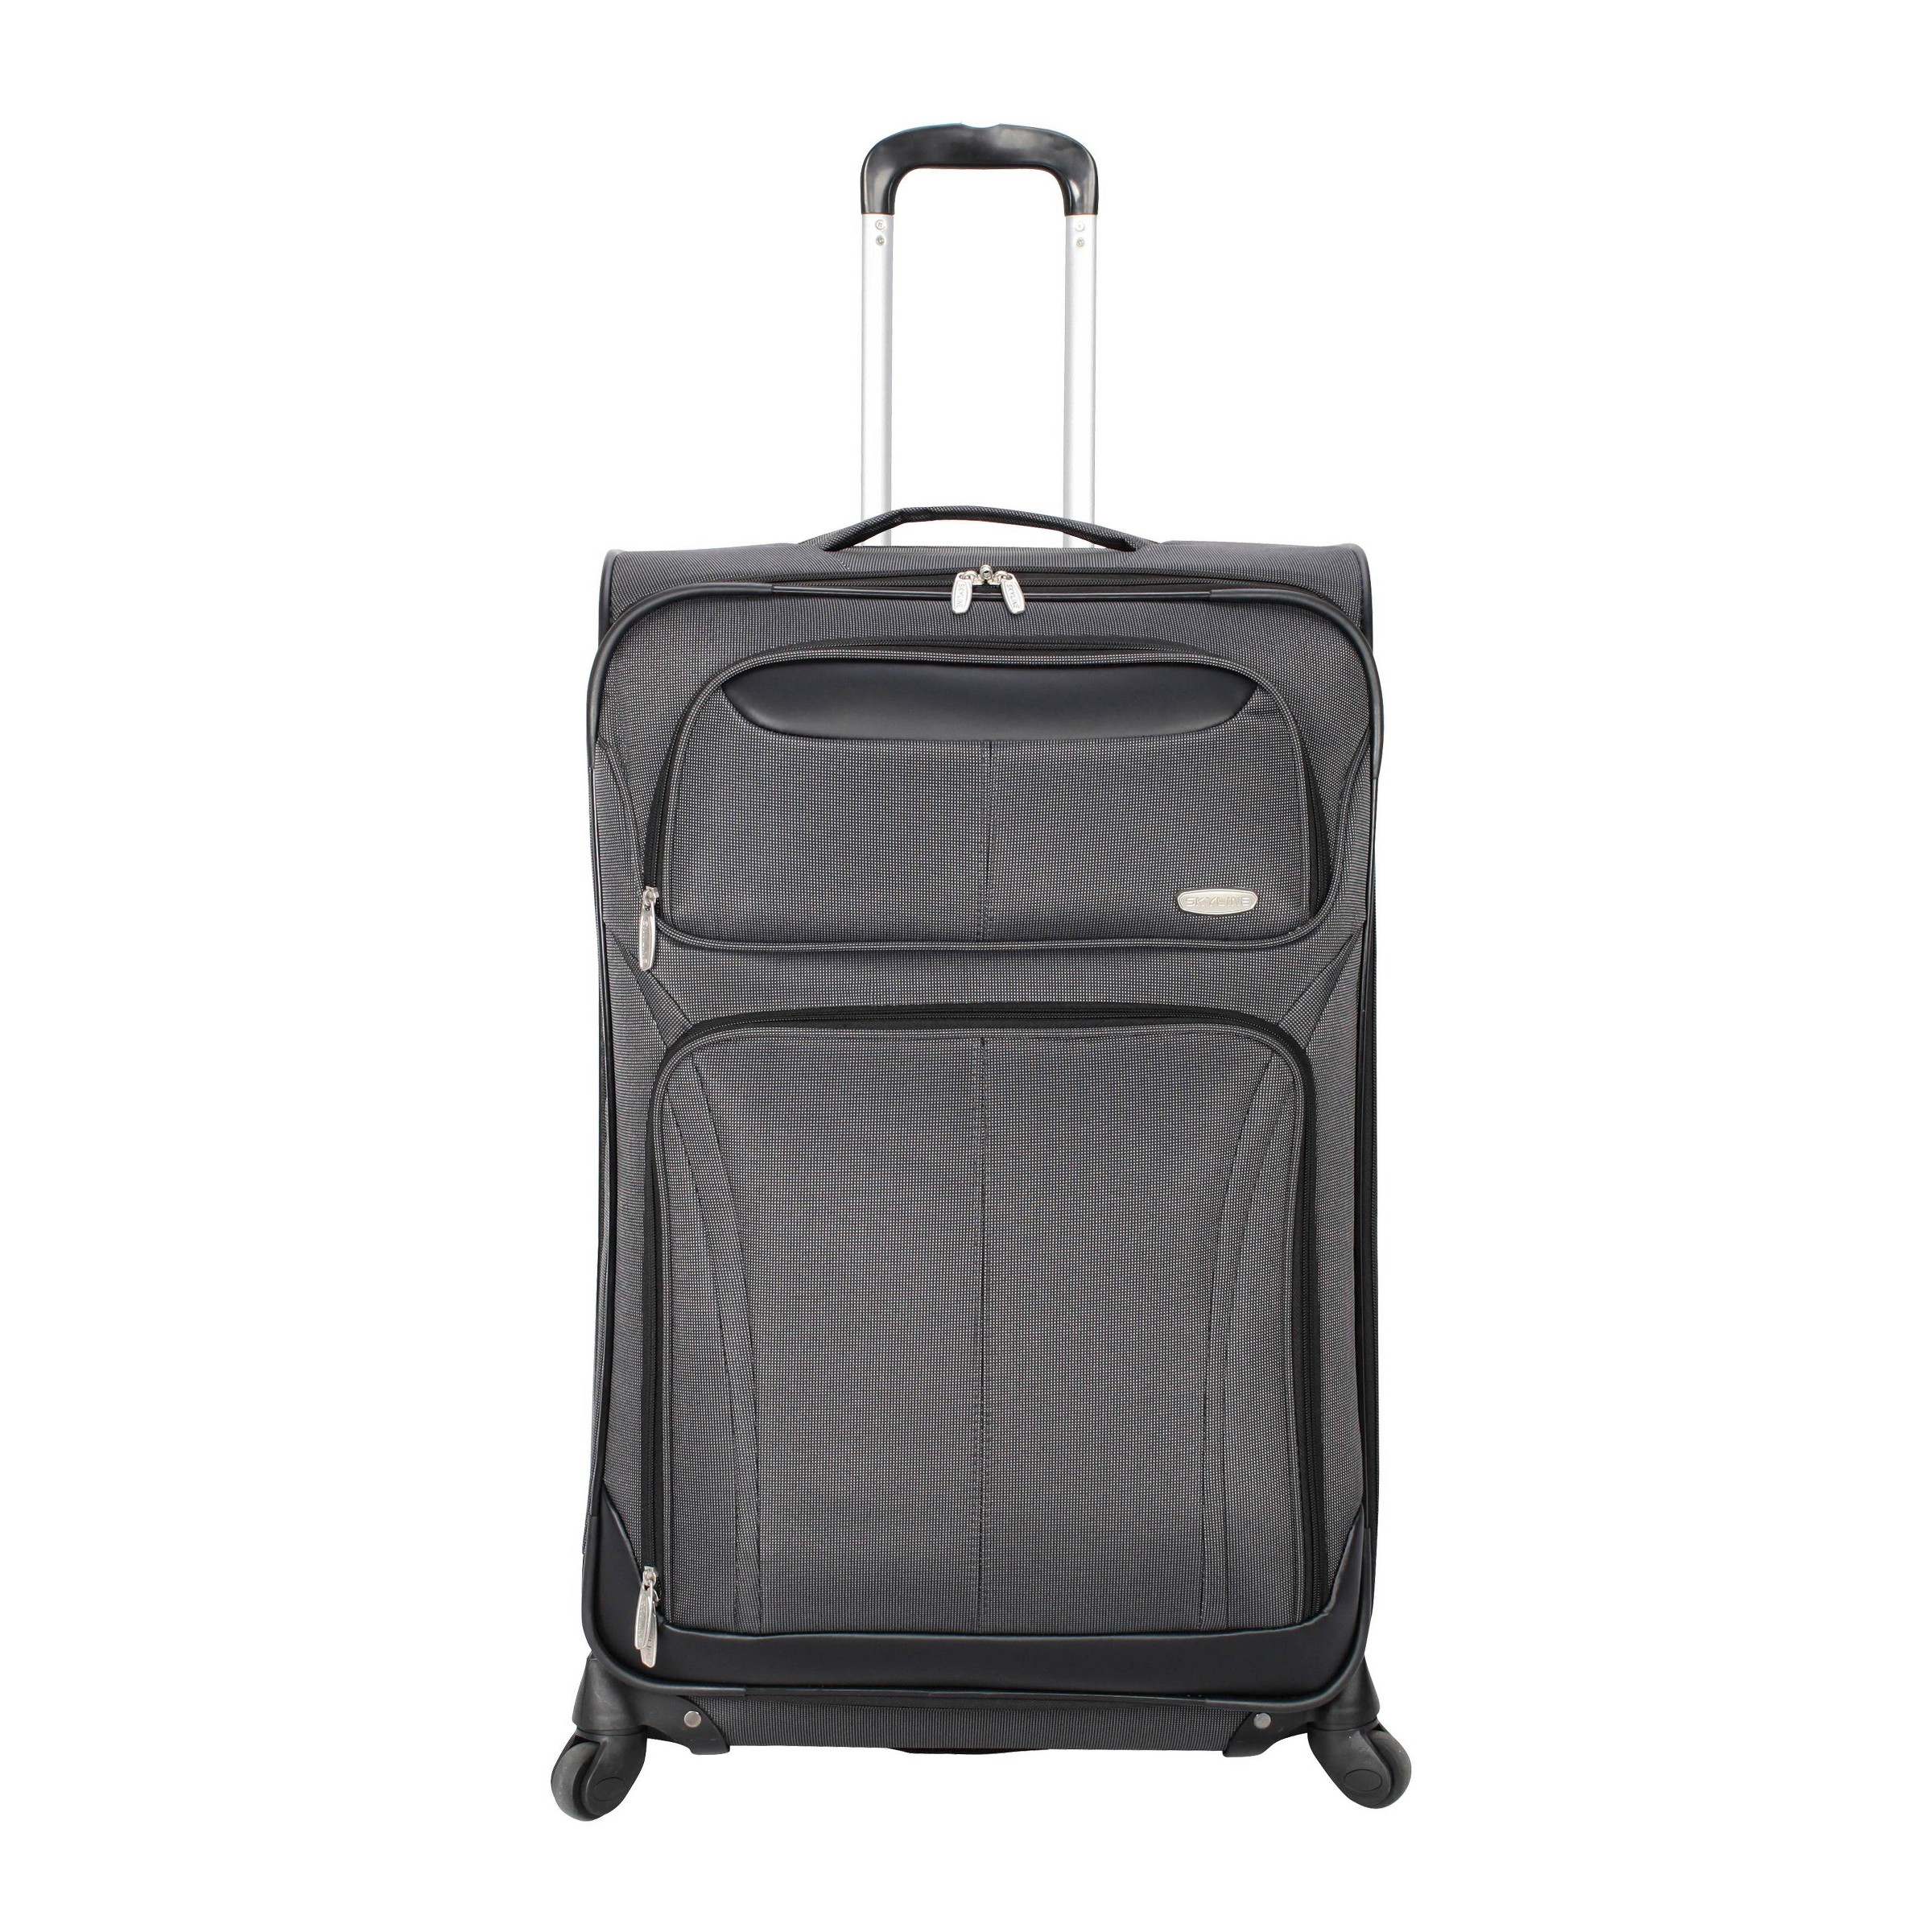 Skyline 21 Inch Softside Carry On Spinner Suitcase (Gray)